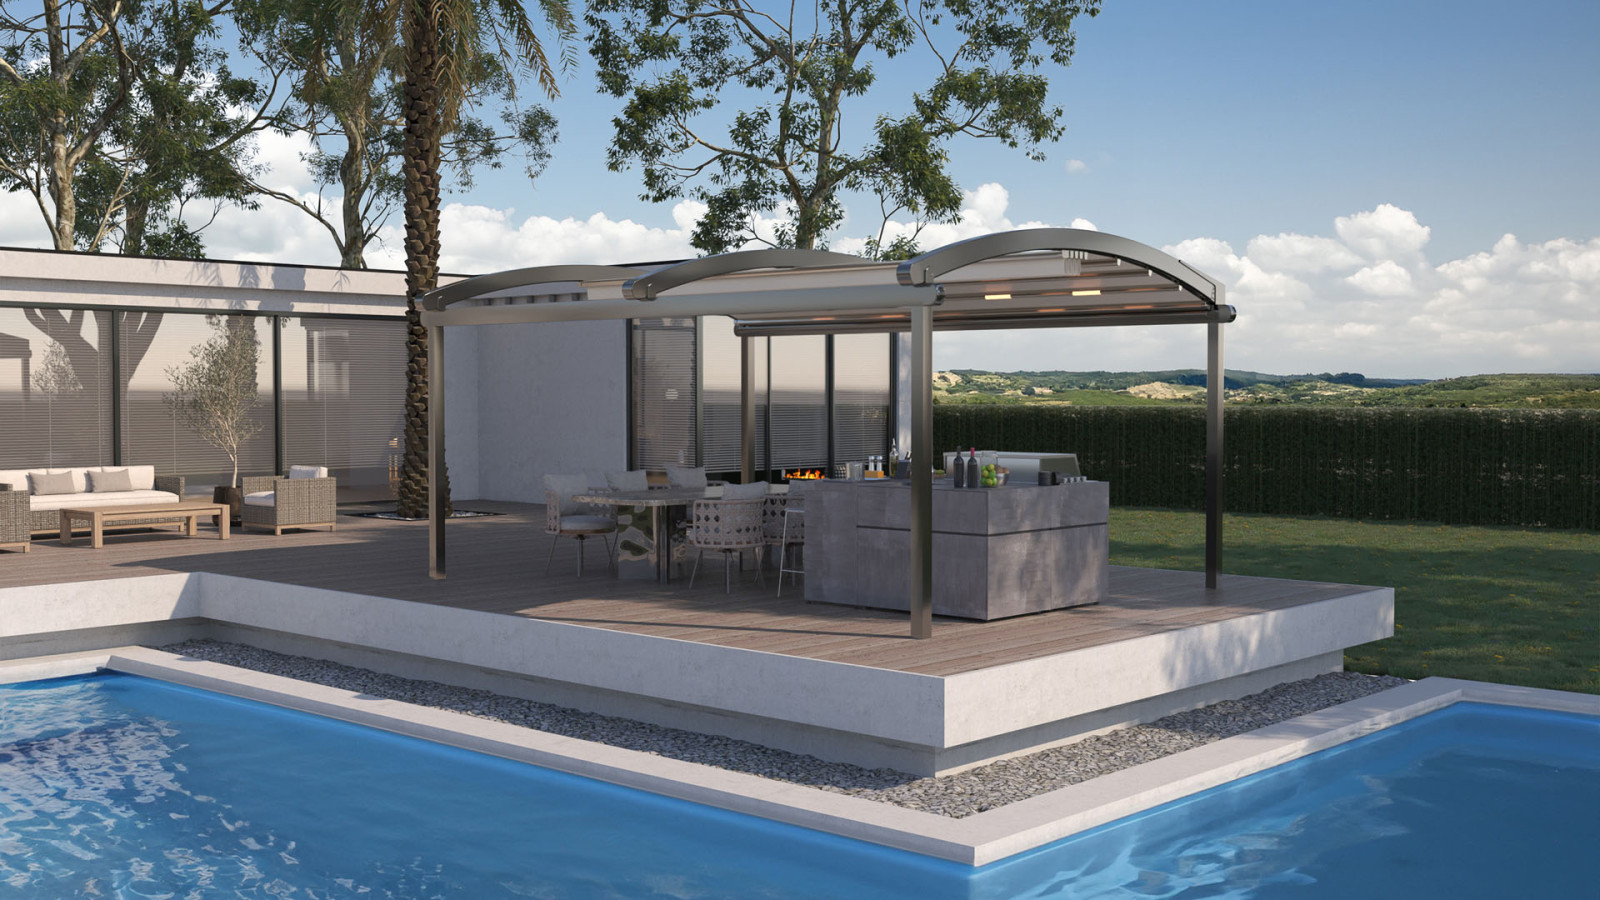 Image of a contemporary home with a pool and garden, showcasing fabric pergolas with a rounded roof.